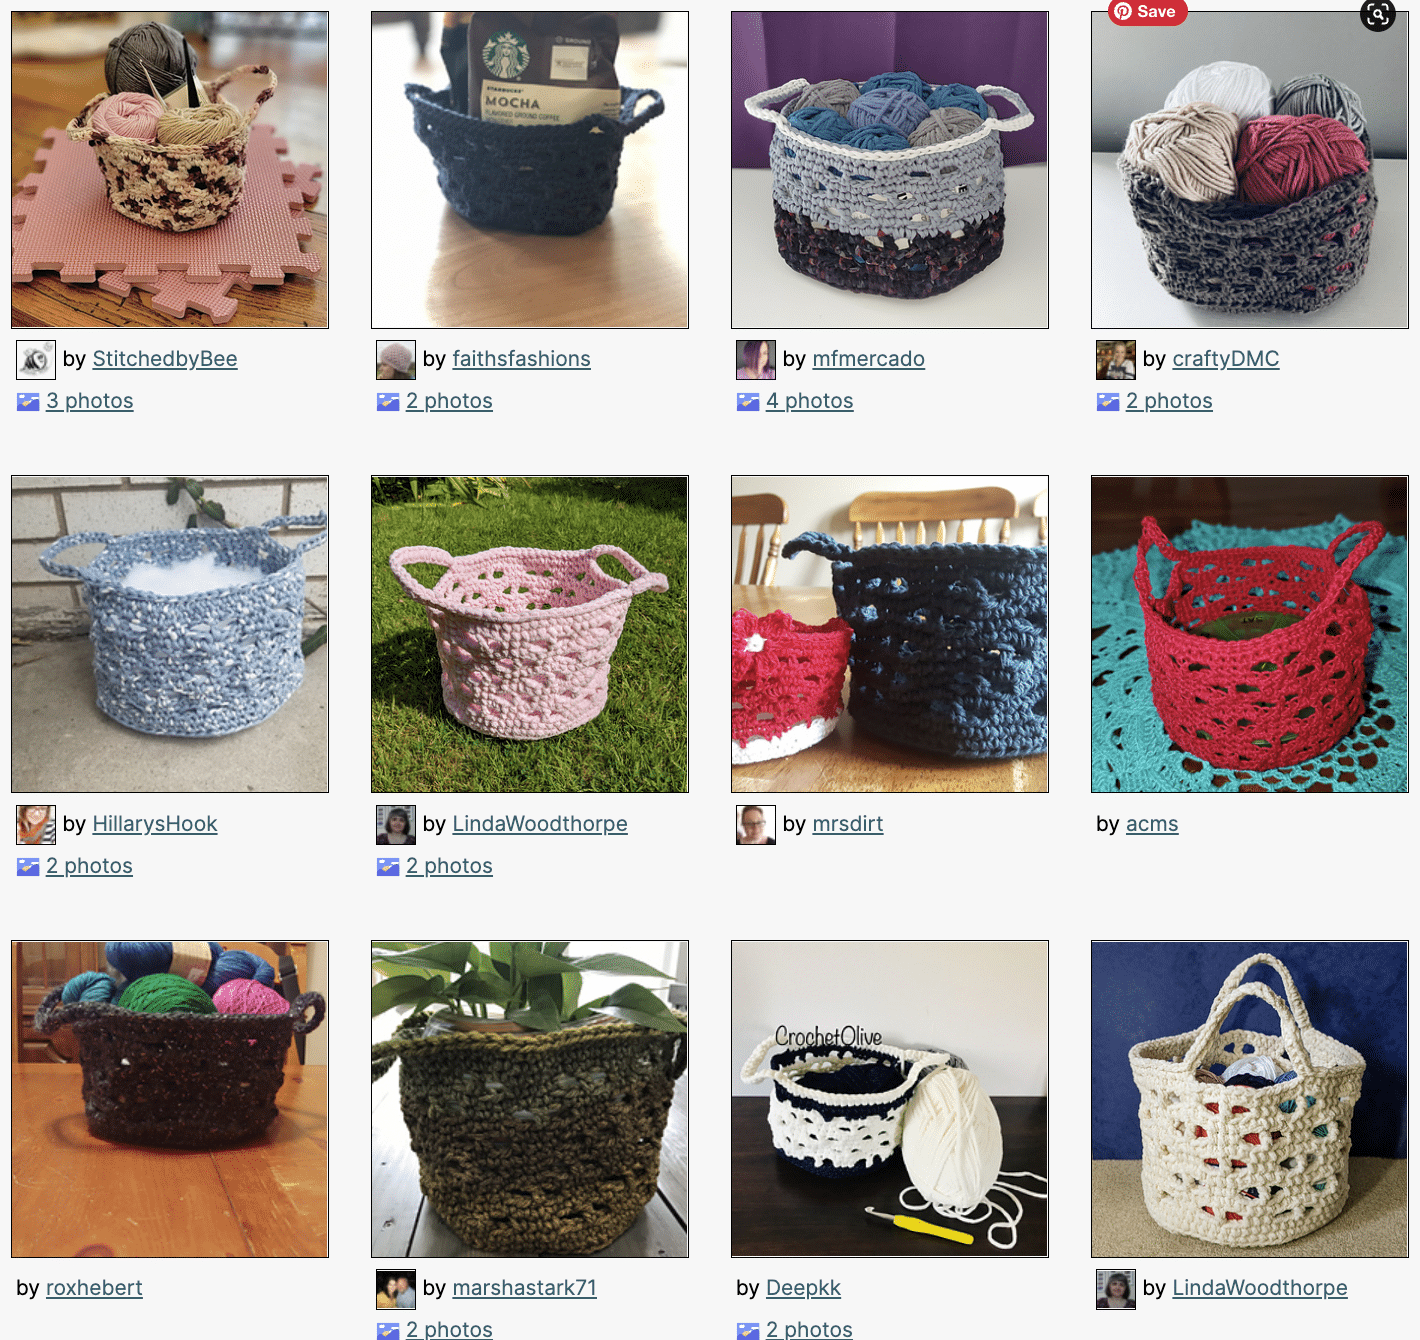 Ravelry projects fast track crochet baskets